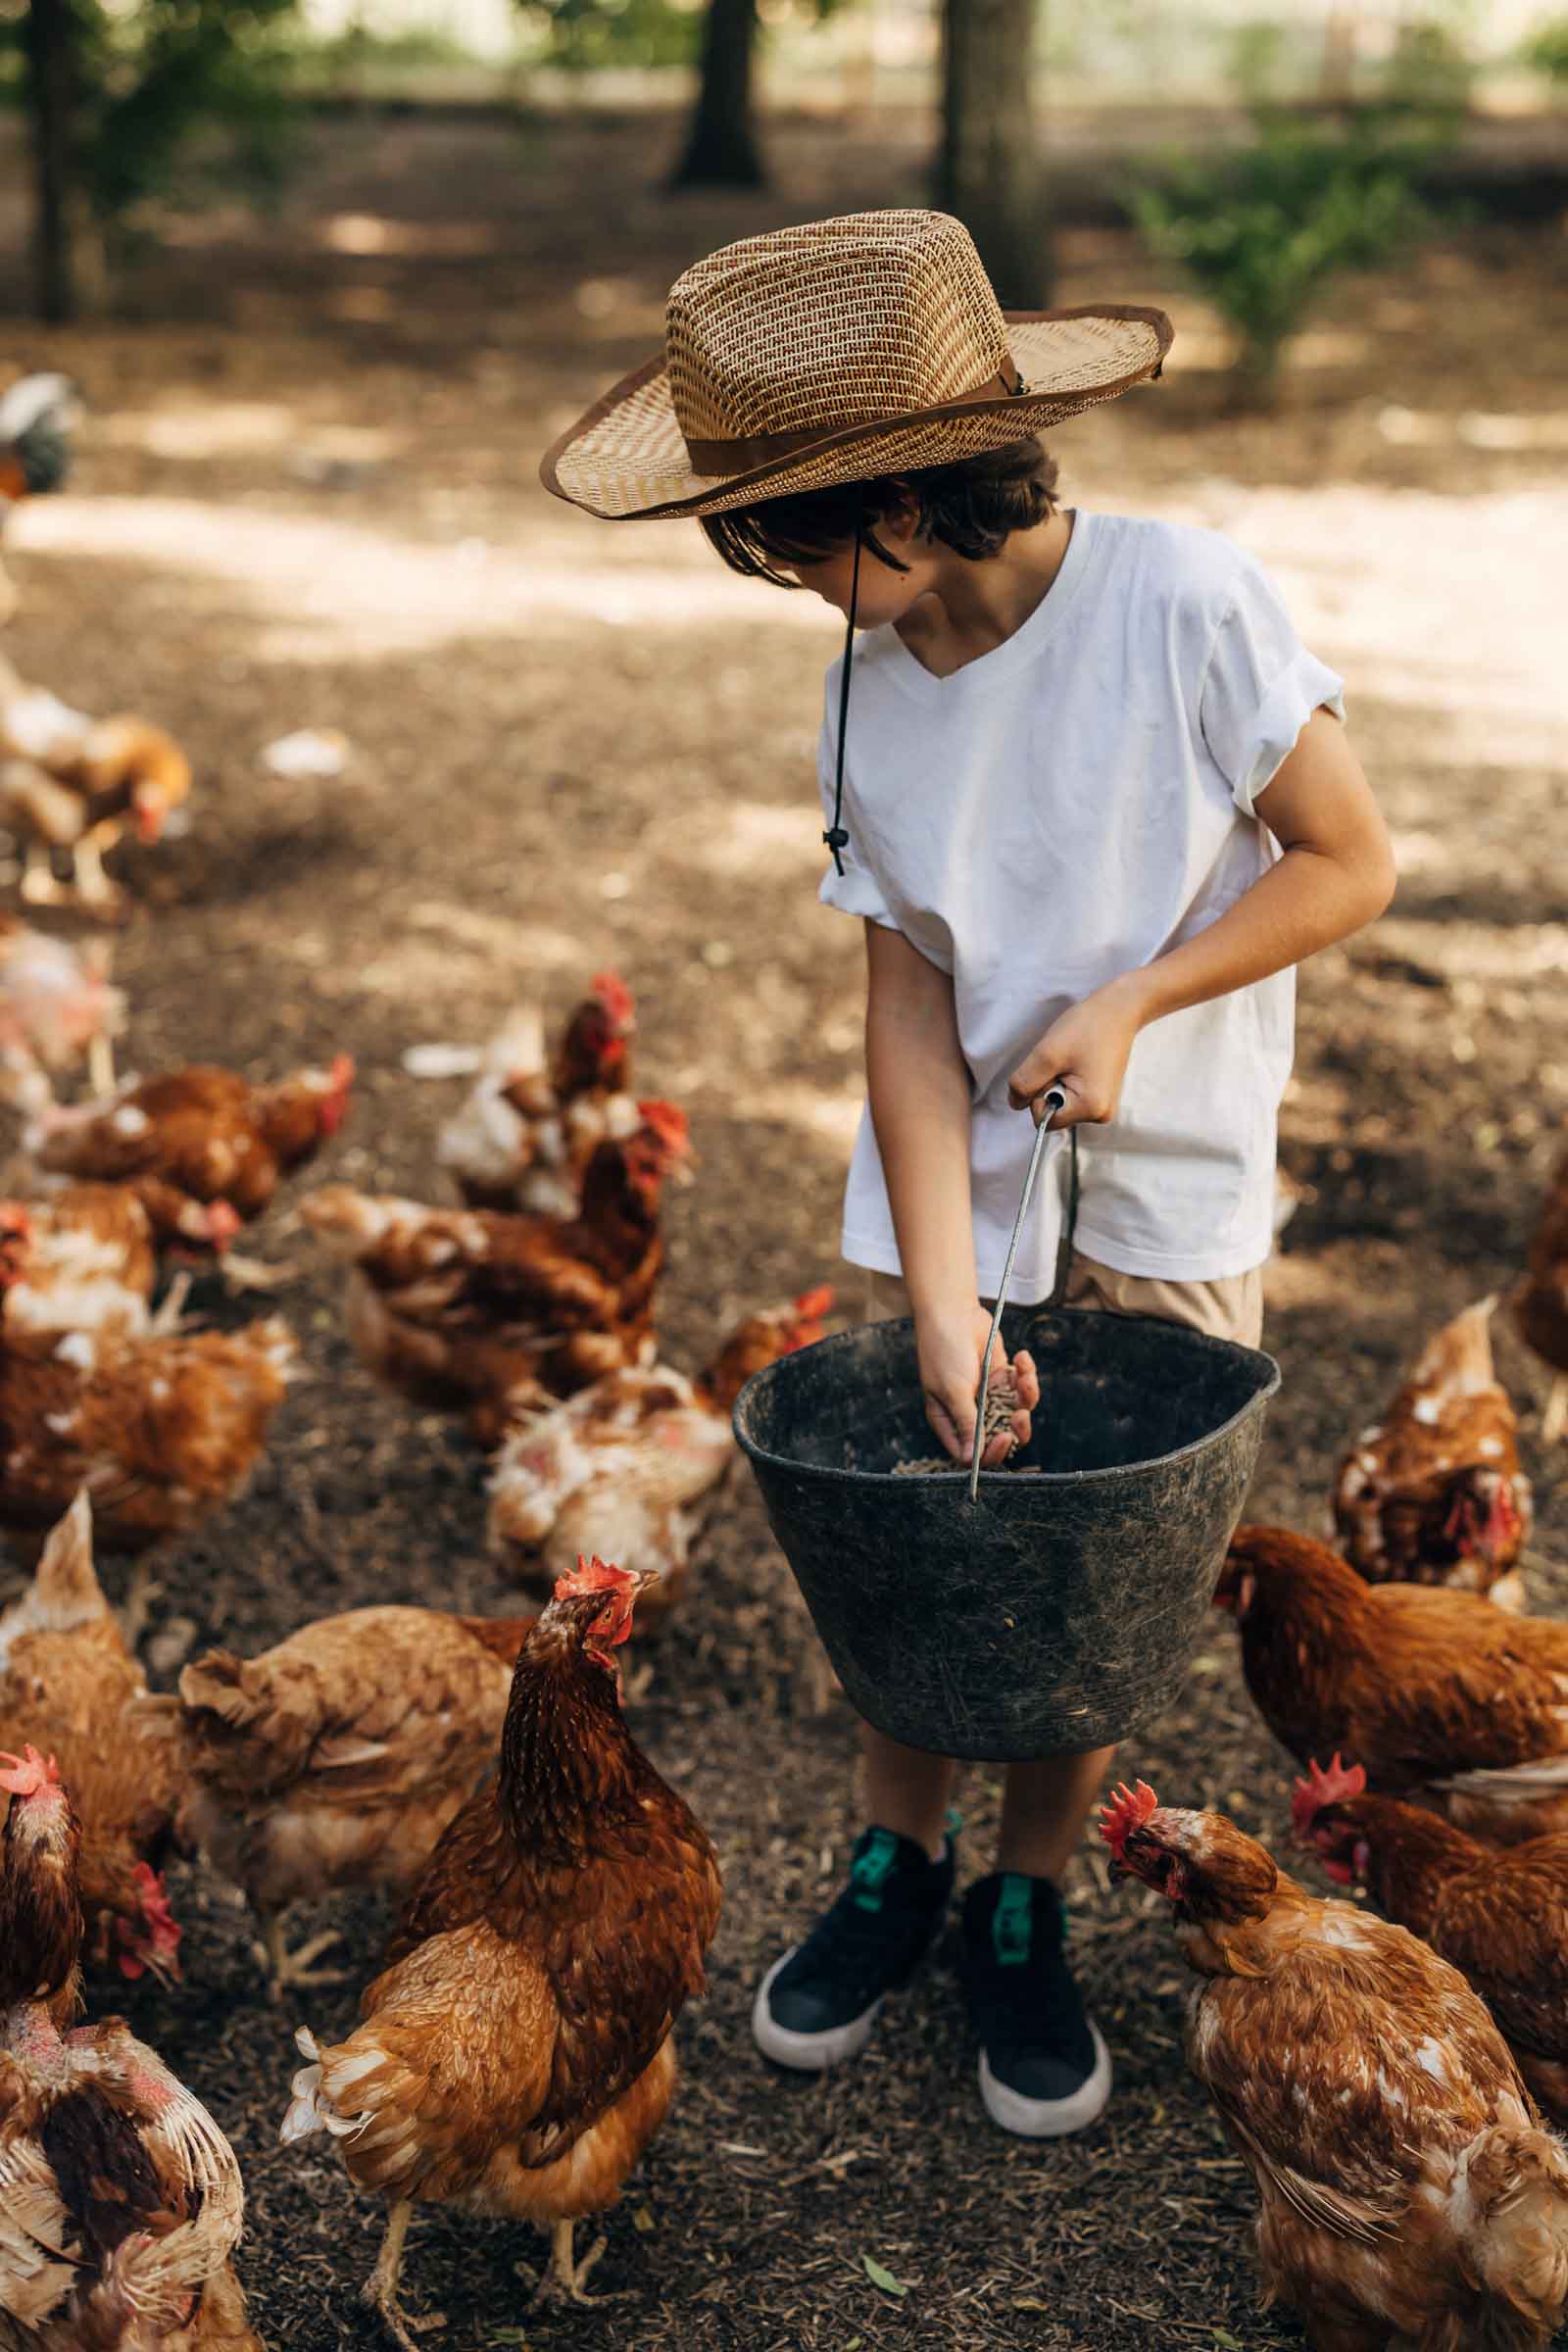 A child in a straw hat choosing eggs for feeding chickens from a large bowl outdoors.